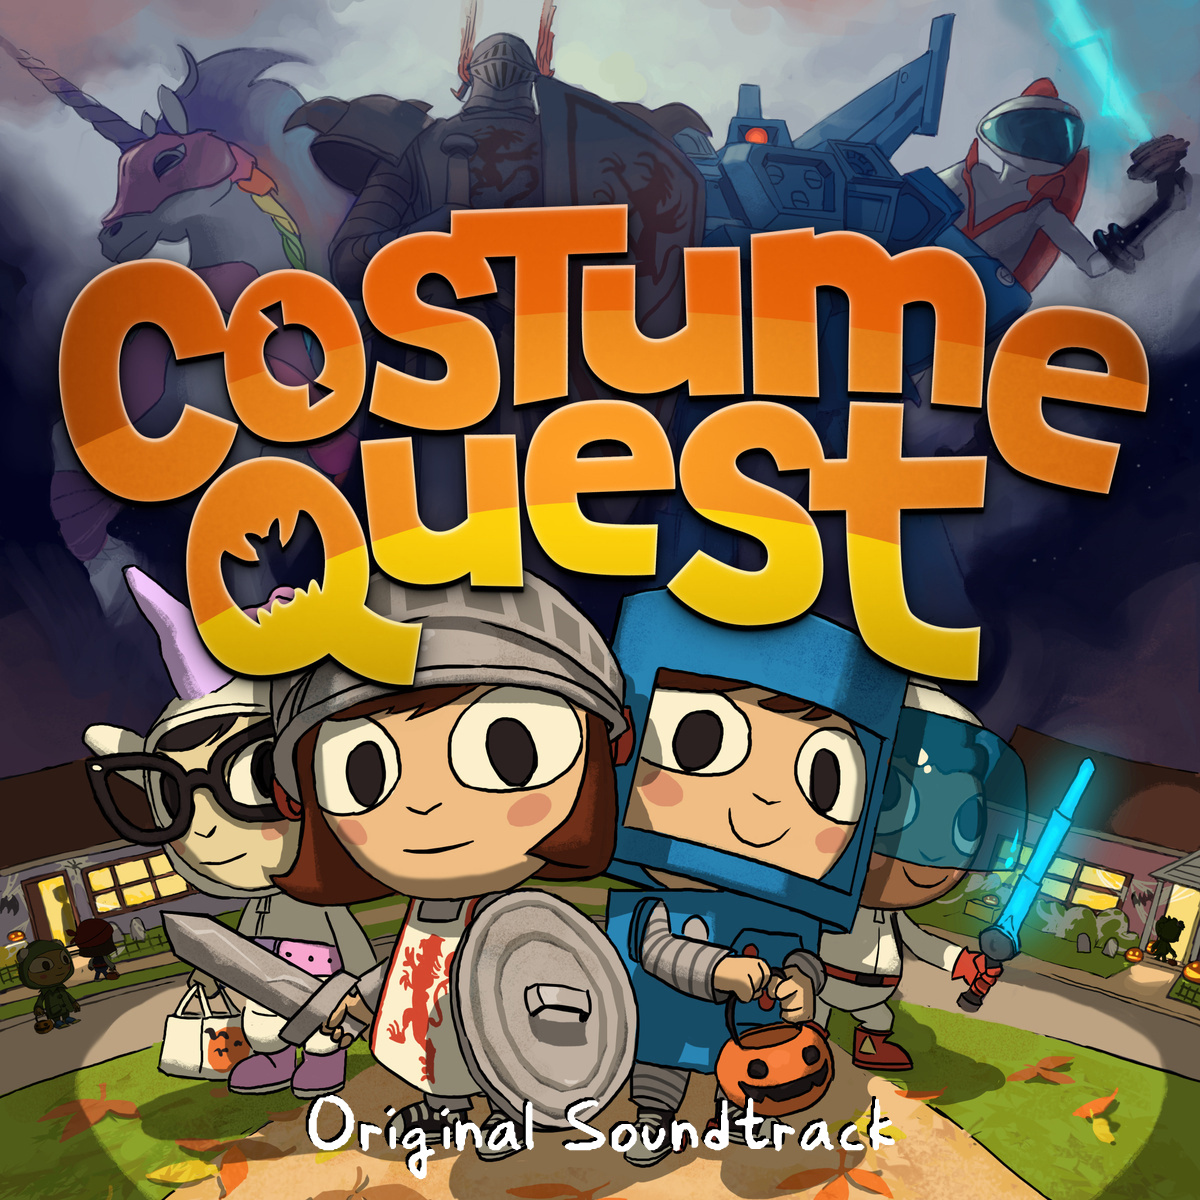 Costume_Quest_OST__cover1200x1200.jpg